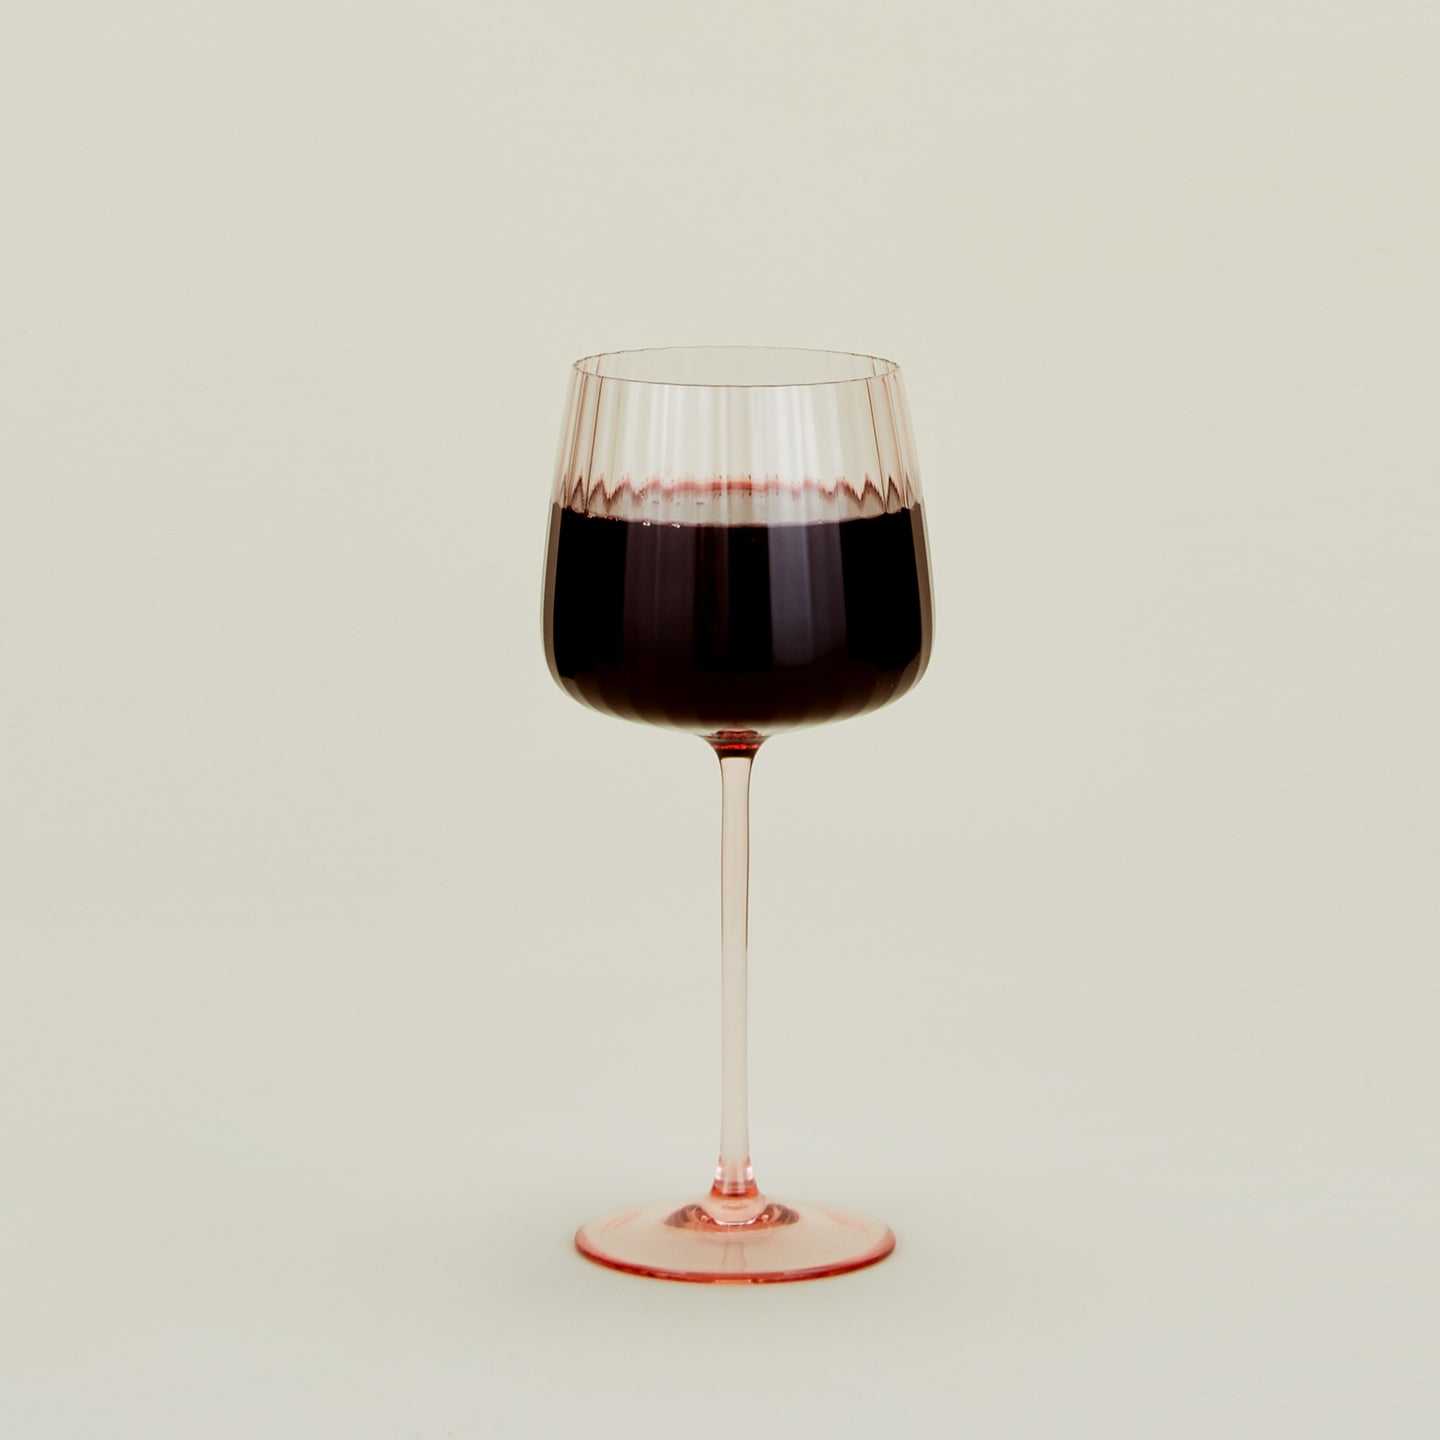 Pink ribbed red wine glass filled with red wine.